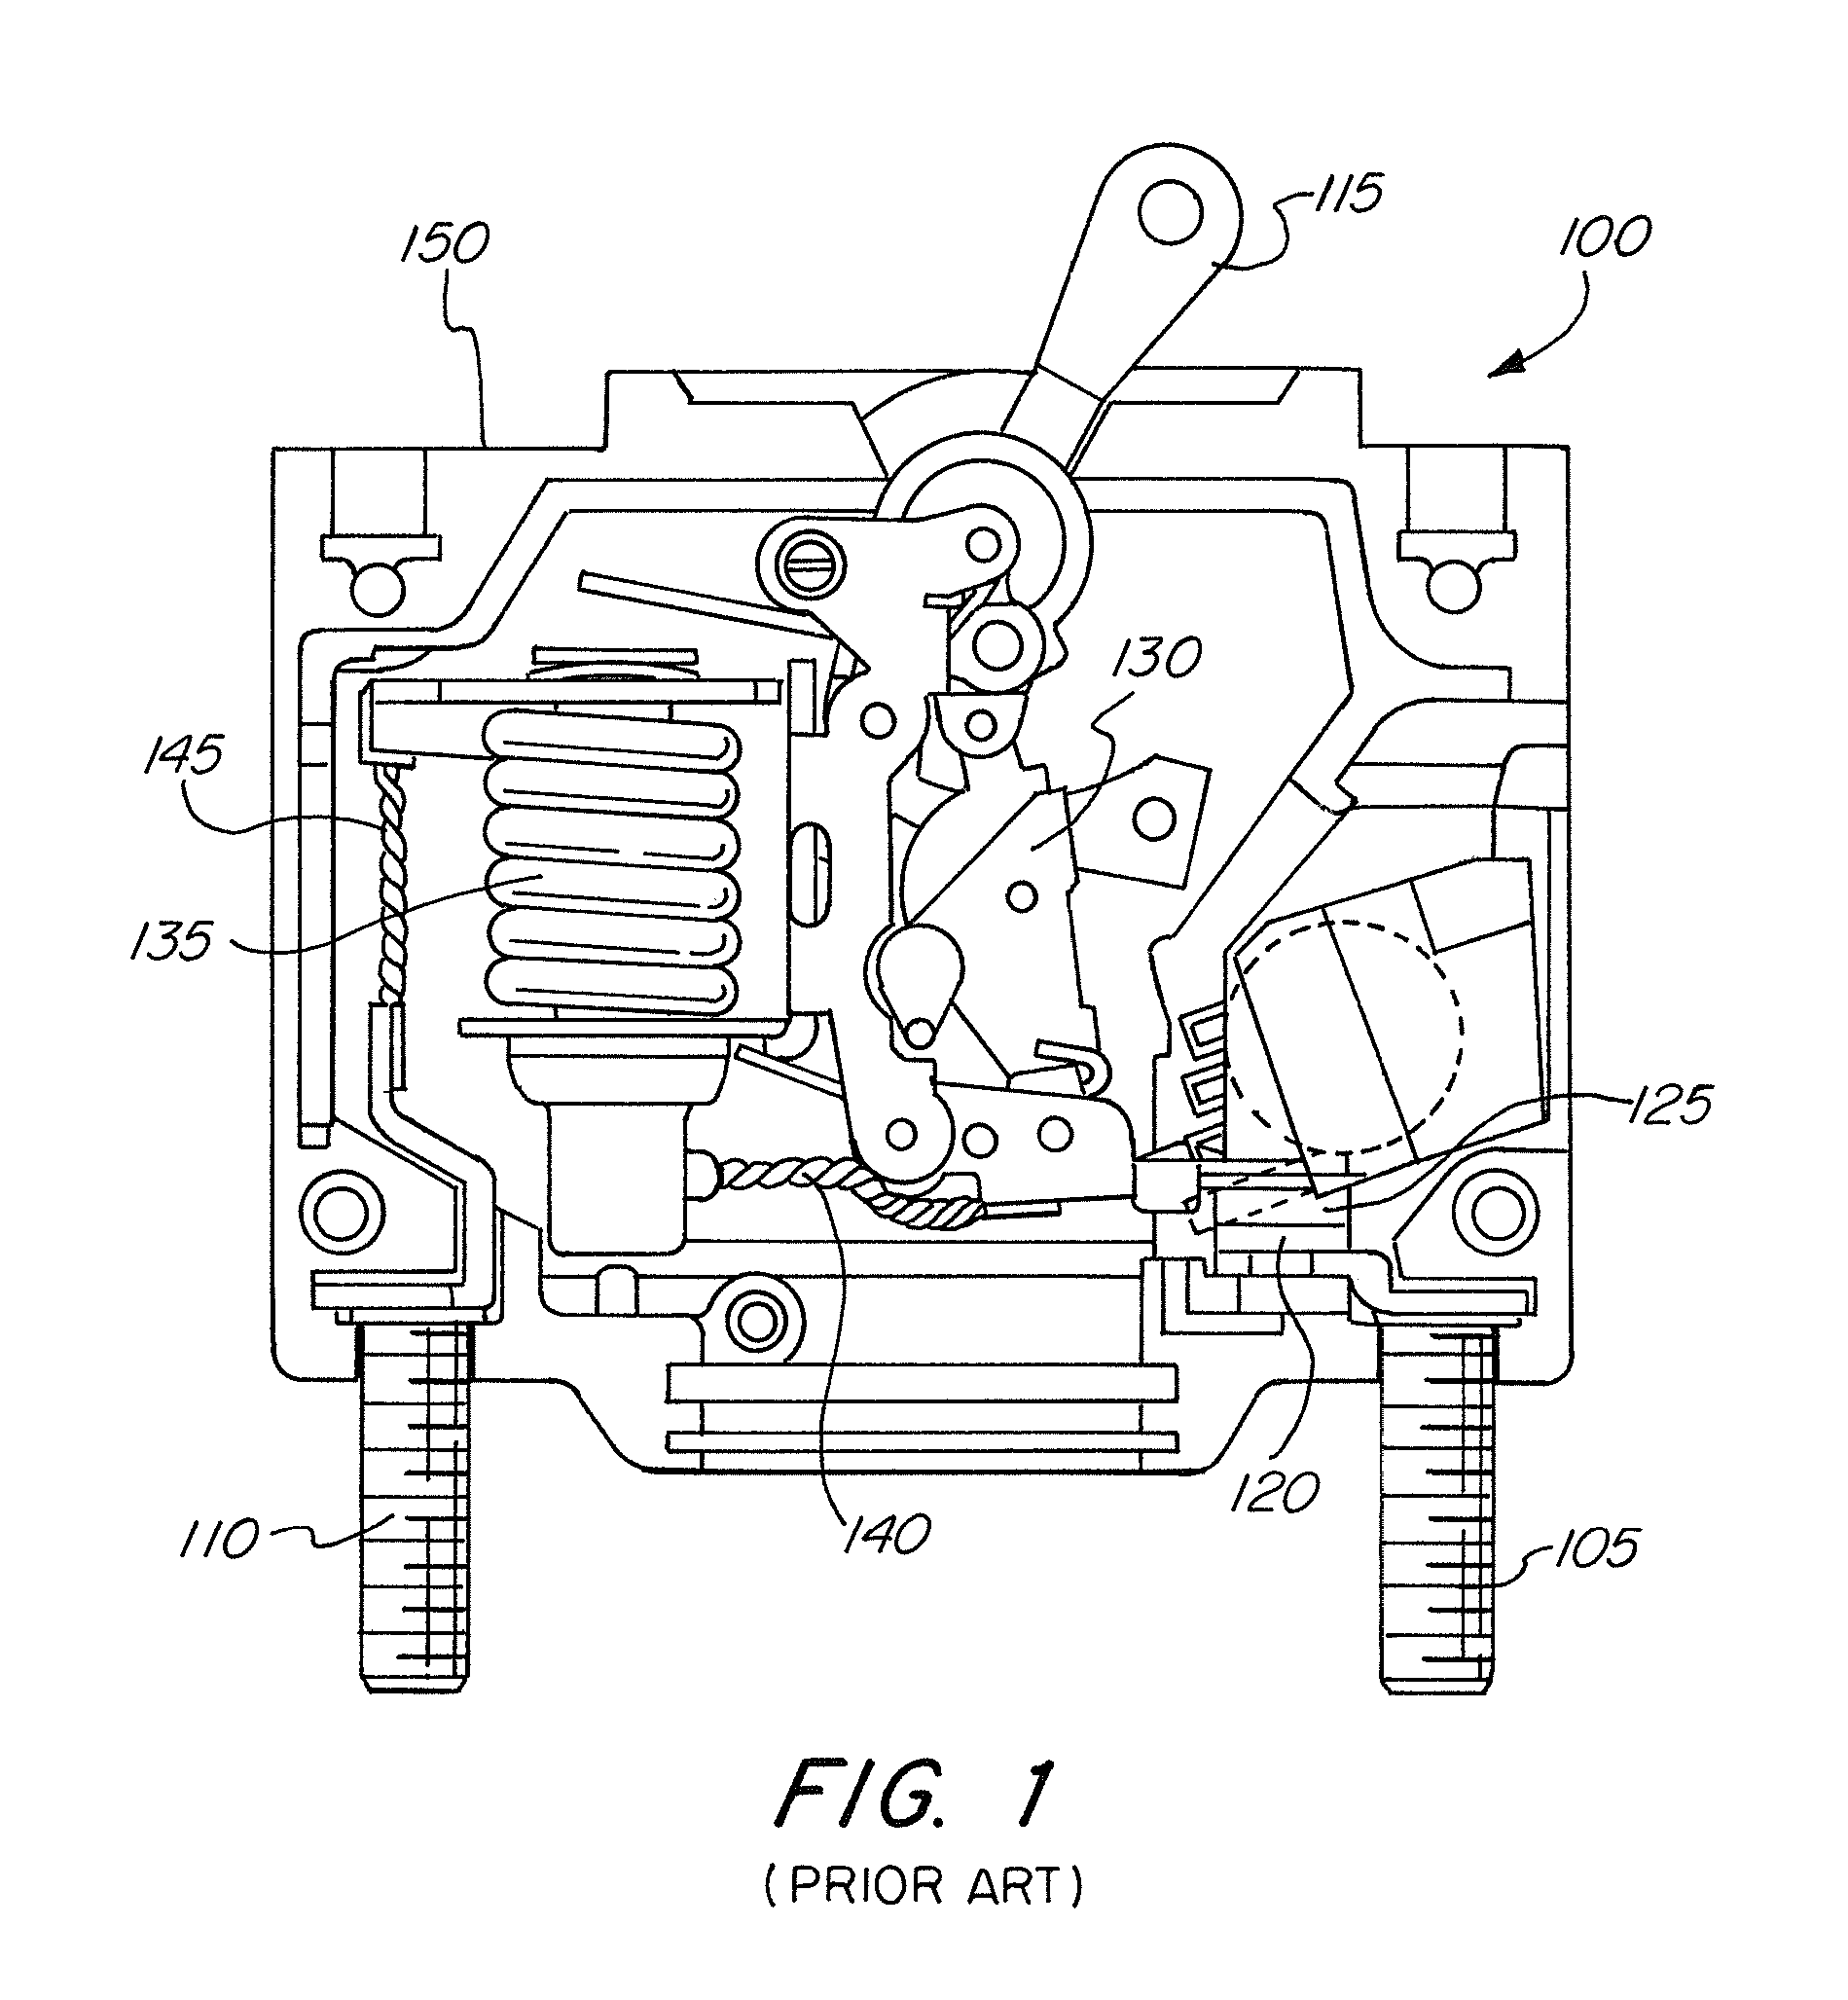 Magnetic circuit interrupter with current limiting capability